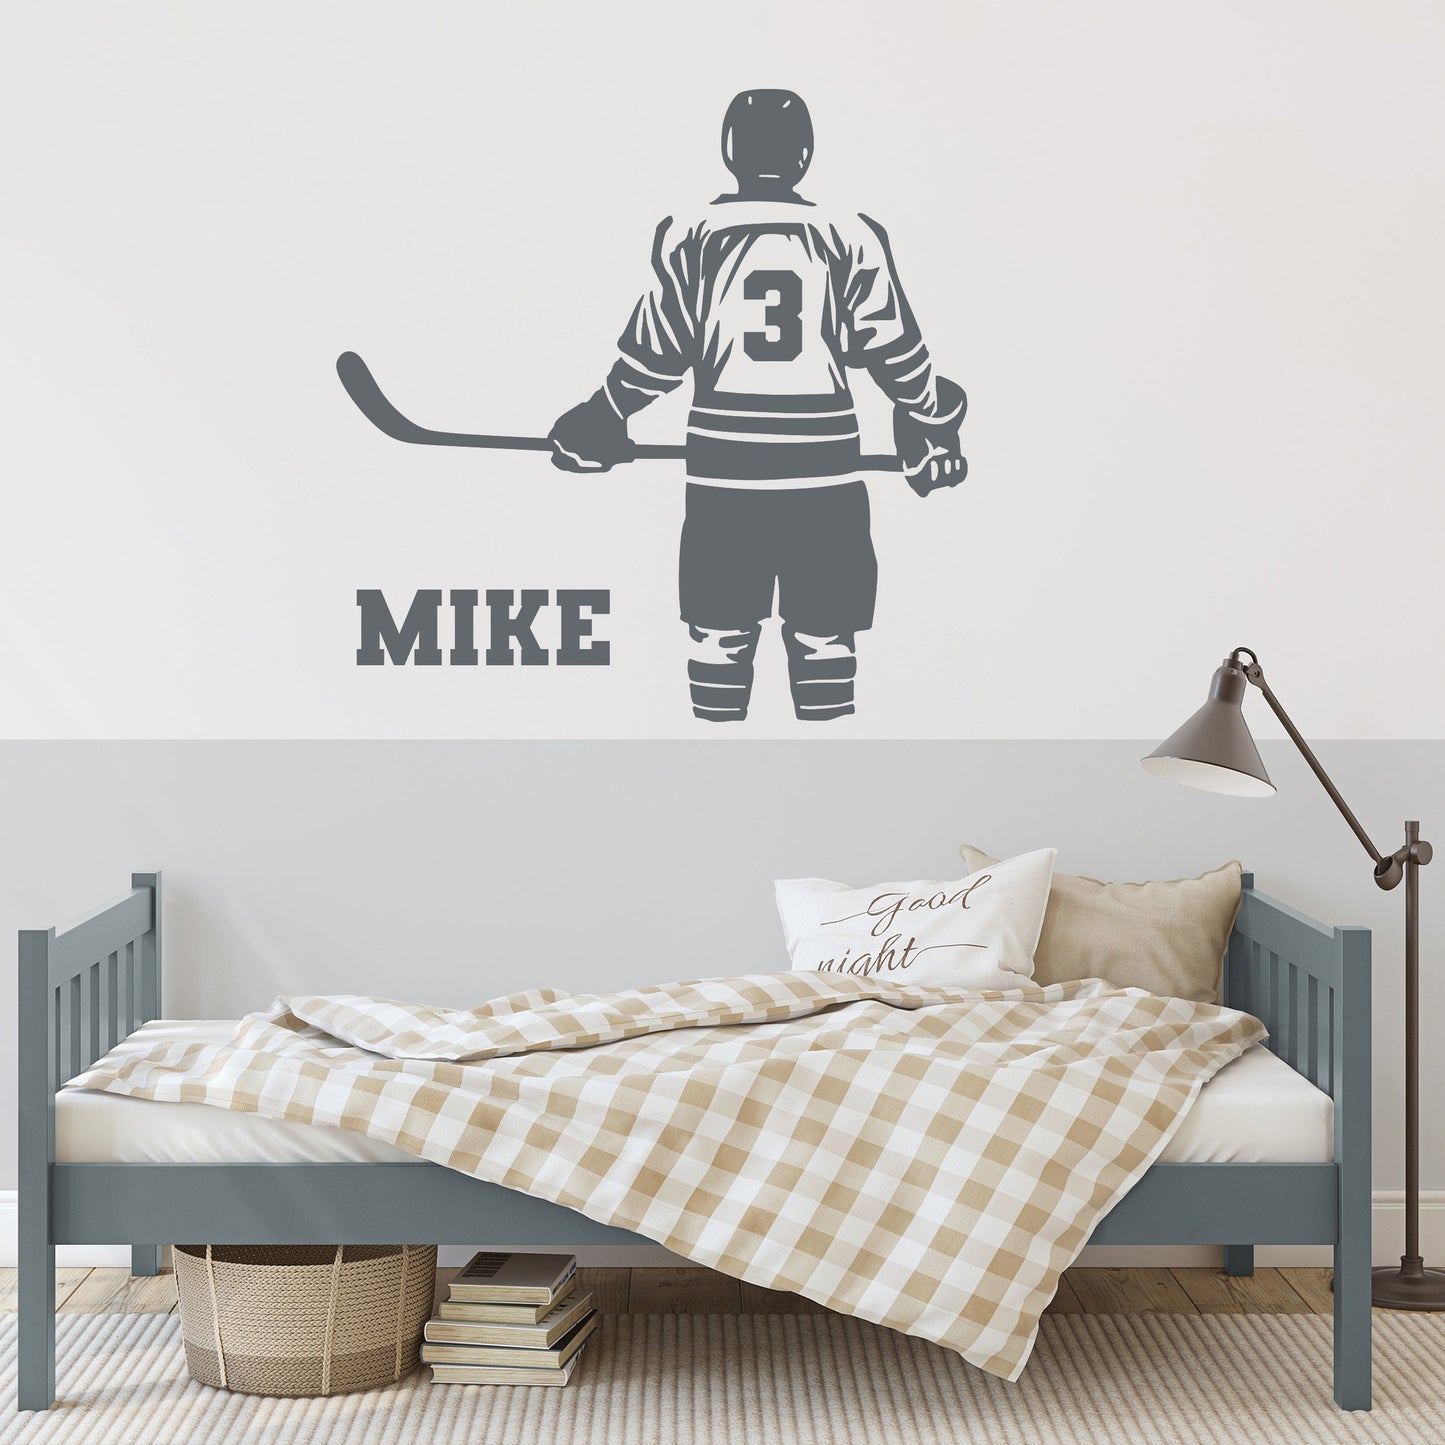 Ice Hockey Wall Decals for Personalized Hockey Room Decor - Hockey Wall Stickers - Hockey Personalized Wall Decal